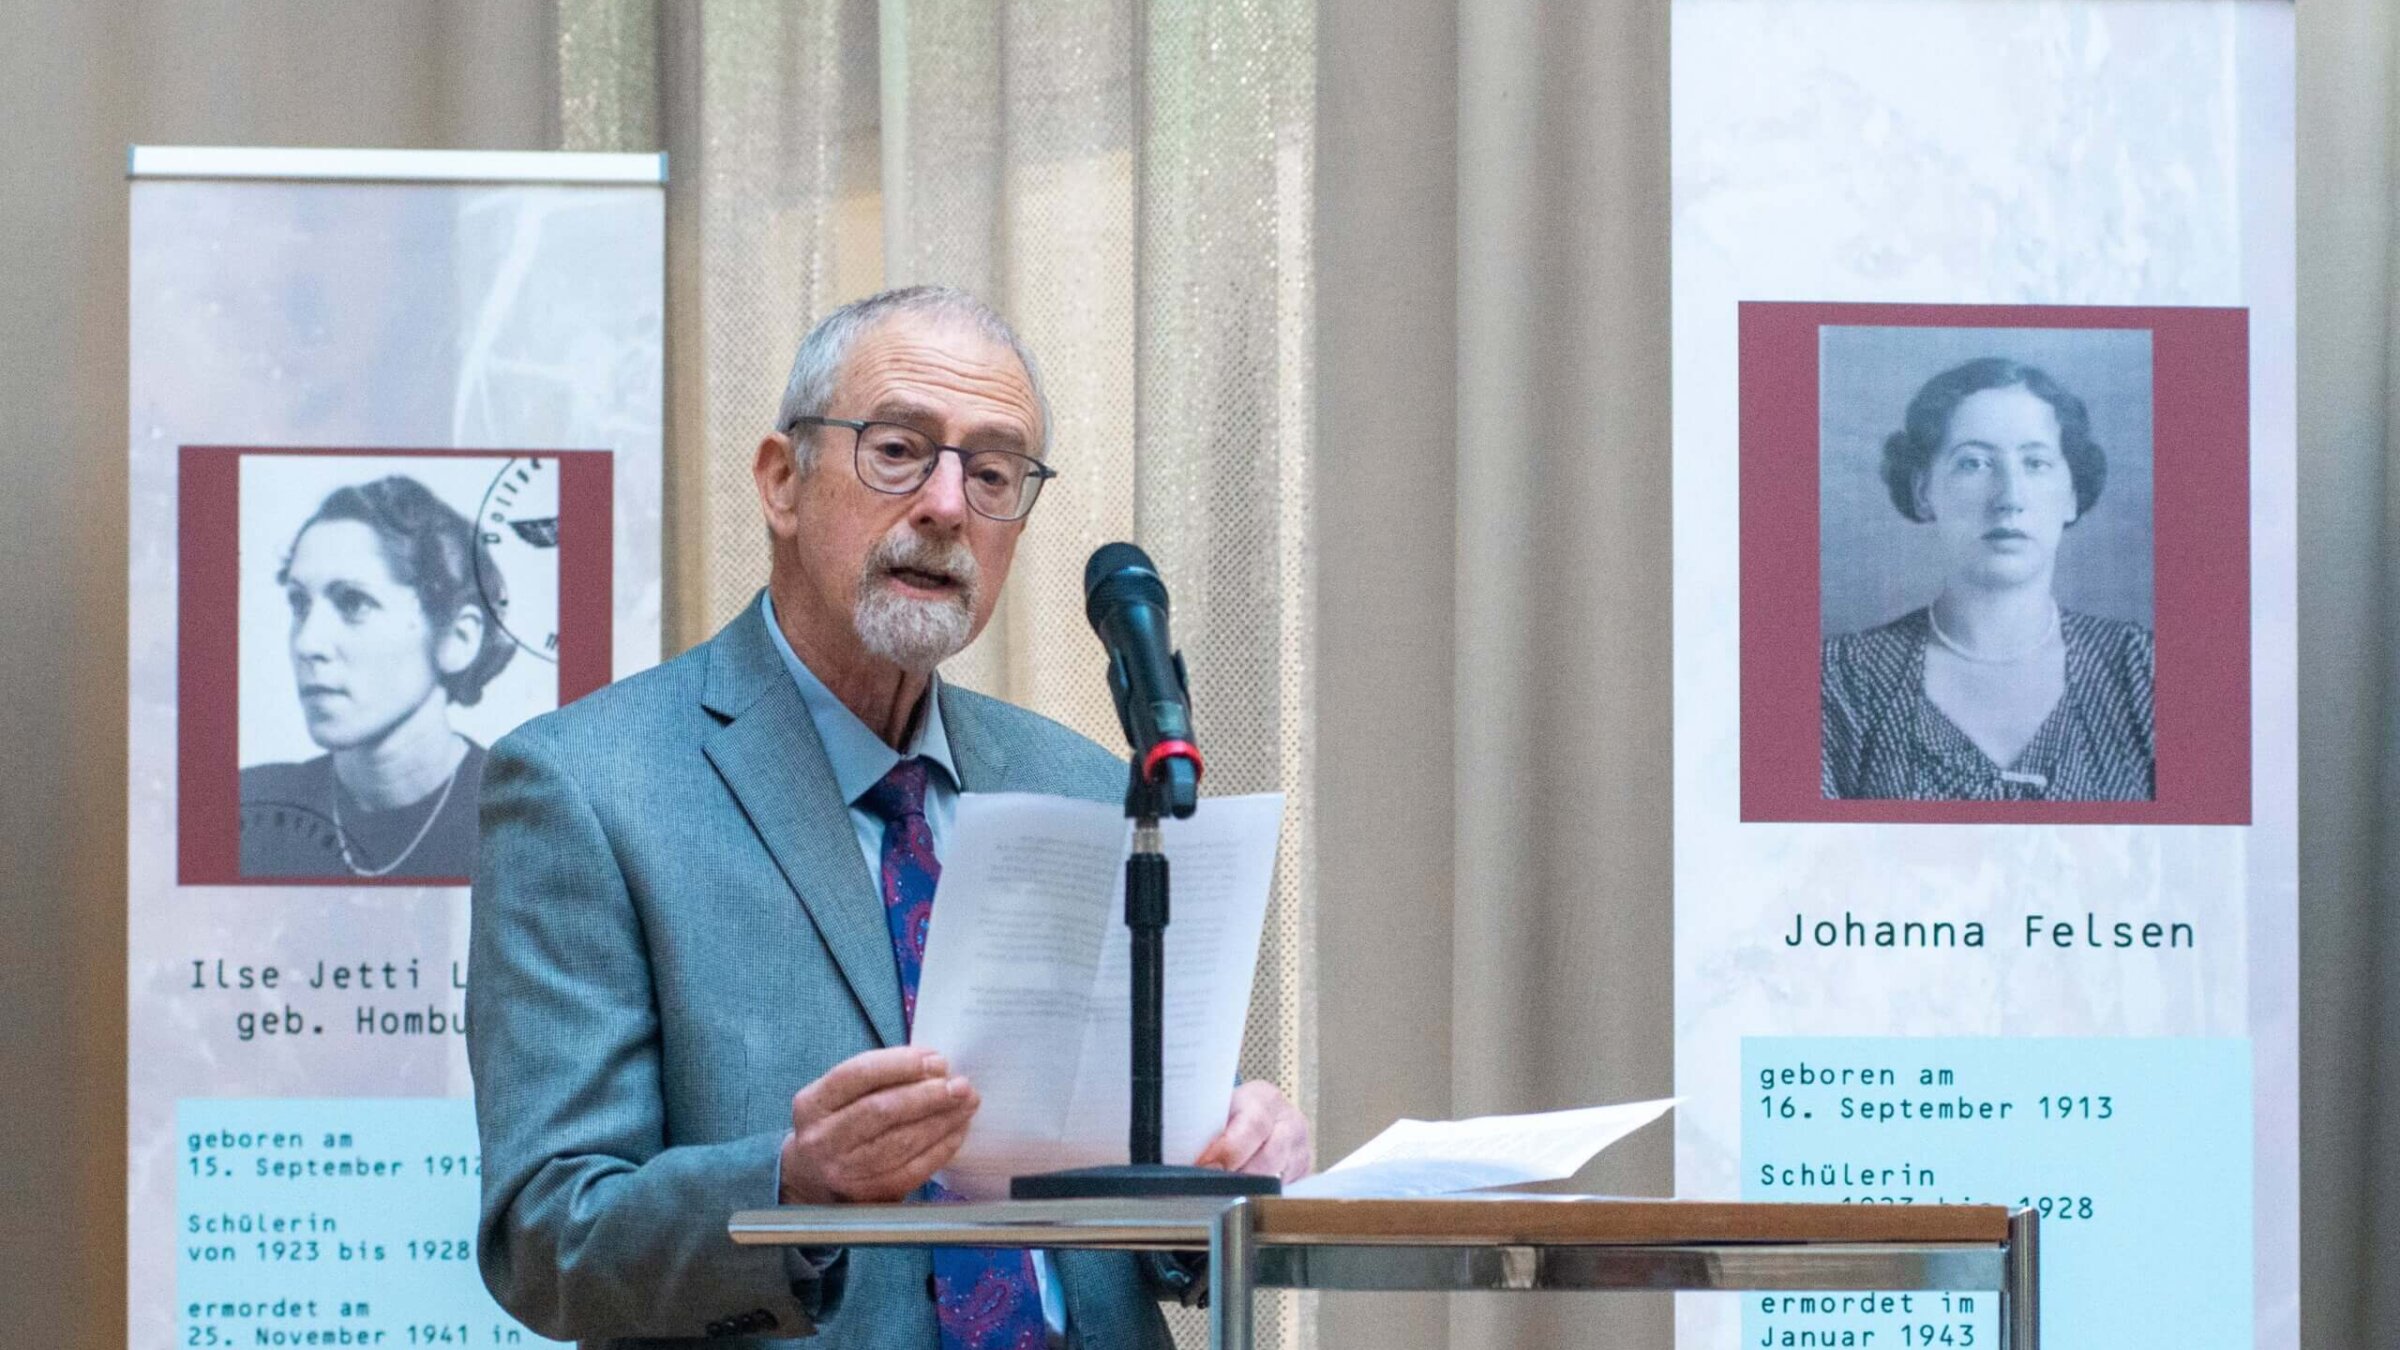 Michael Felsen speaks at the Luisengymnasium in Munich, Germany, memorializing his deceased aunt Johanna (pictured at right) on Nov. 23, 2022. Johanna and nineteen of her classmates were murdered in the Holocaust. 